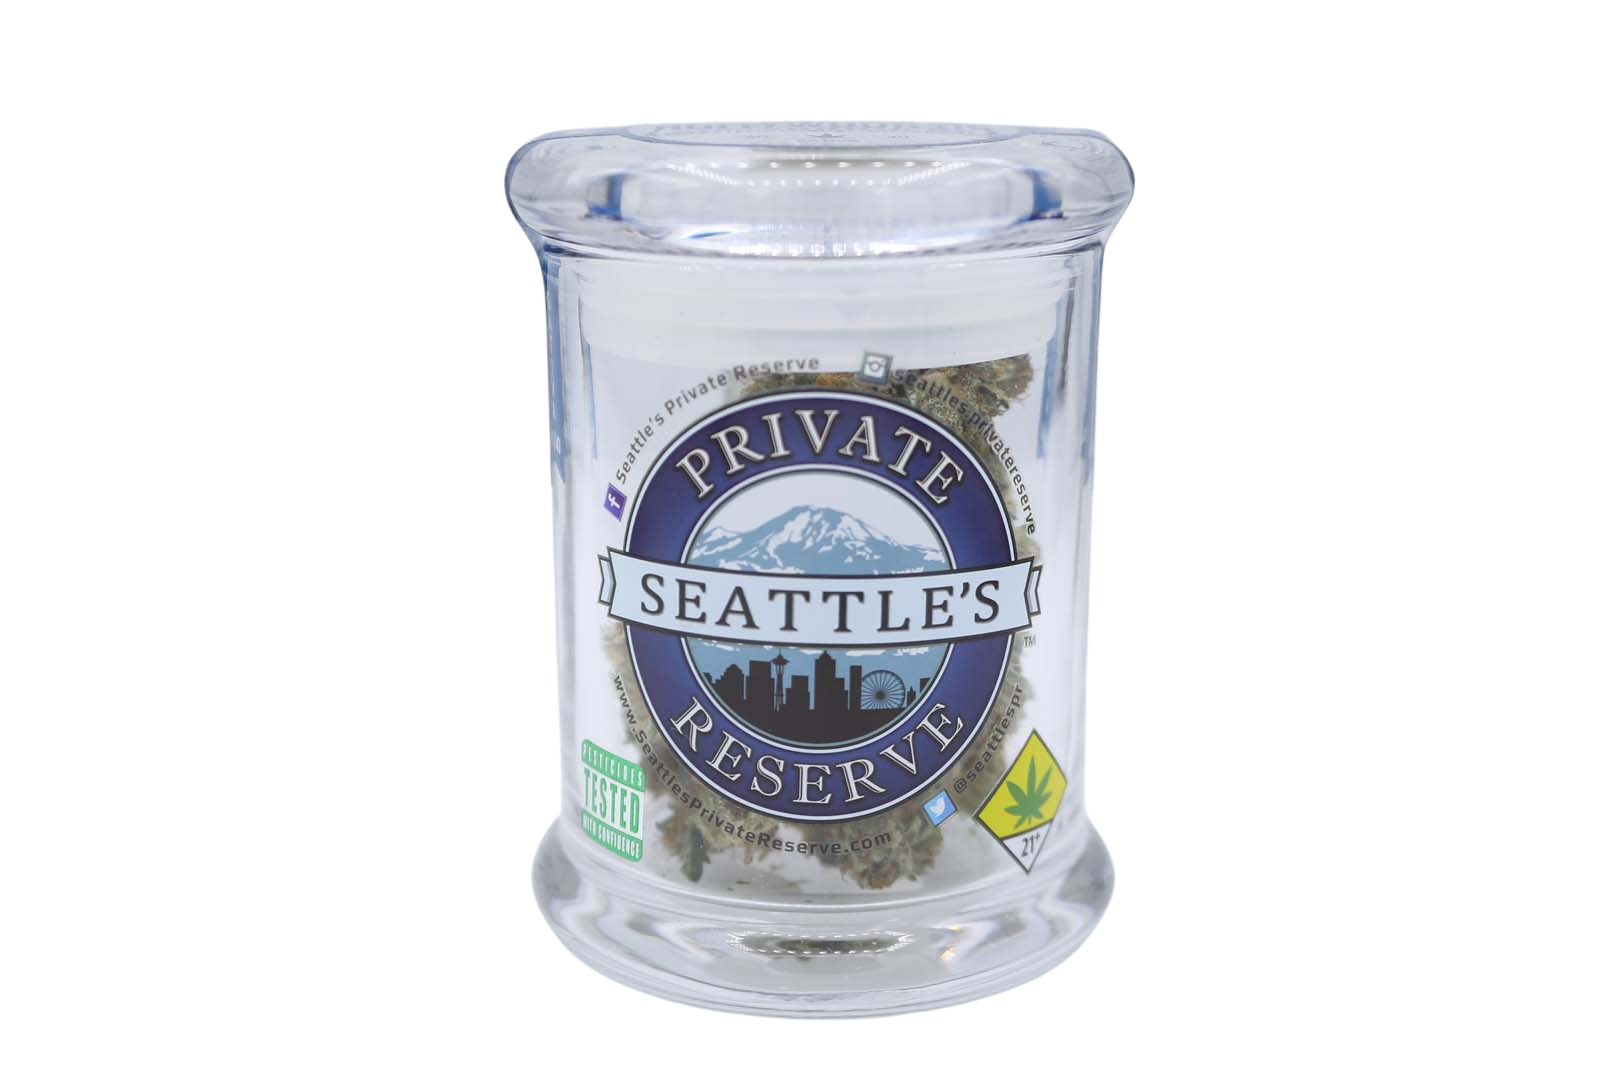 Seattles Private Reserve Duct Tape